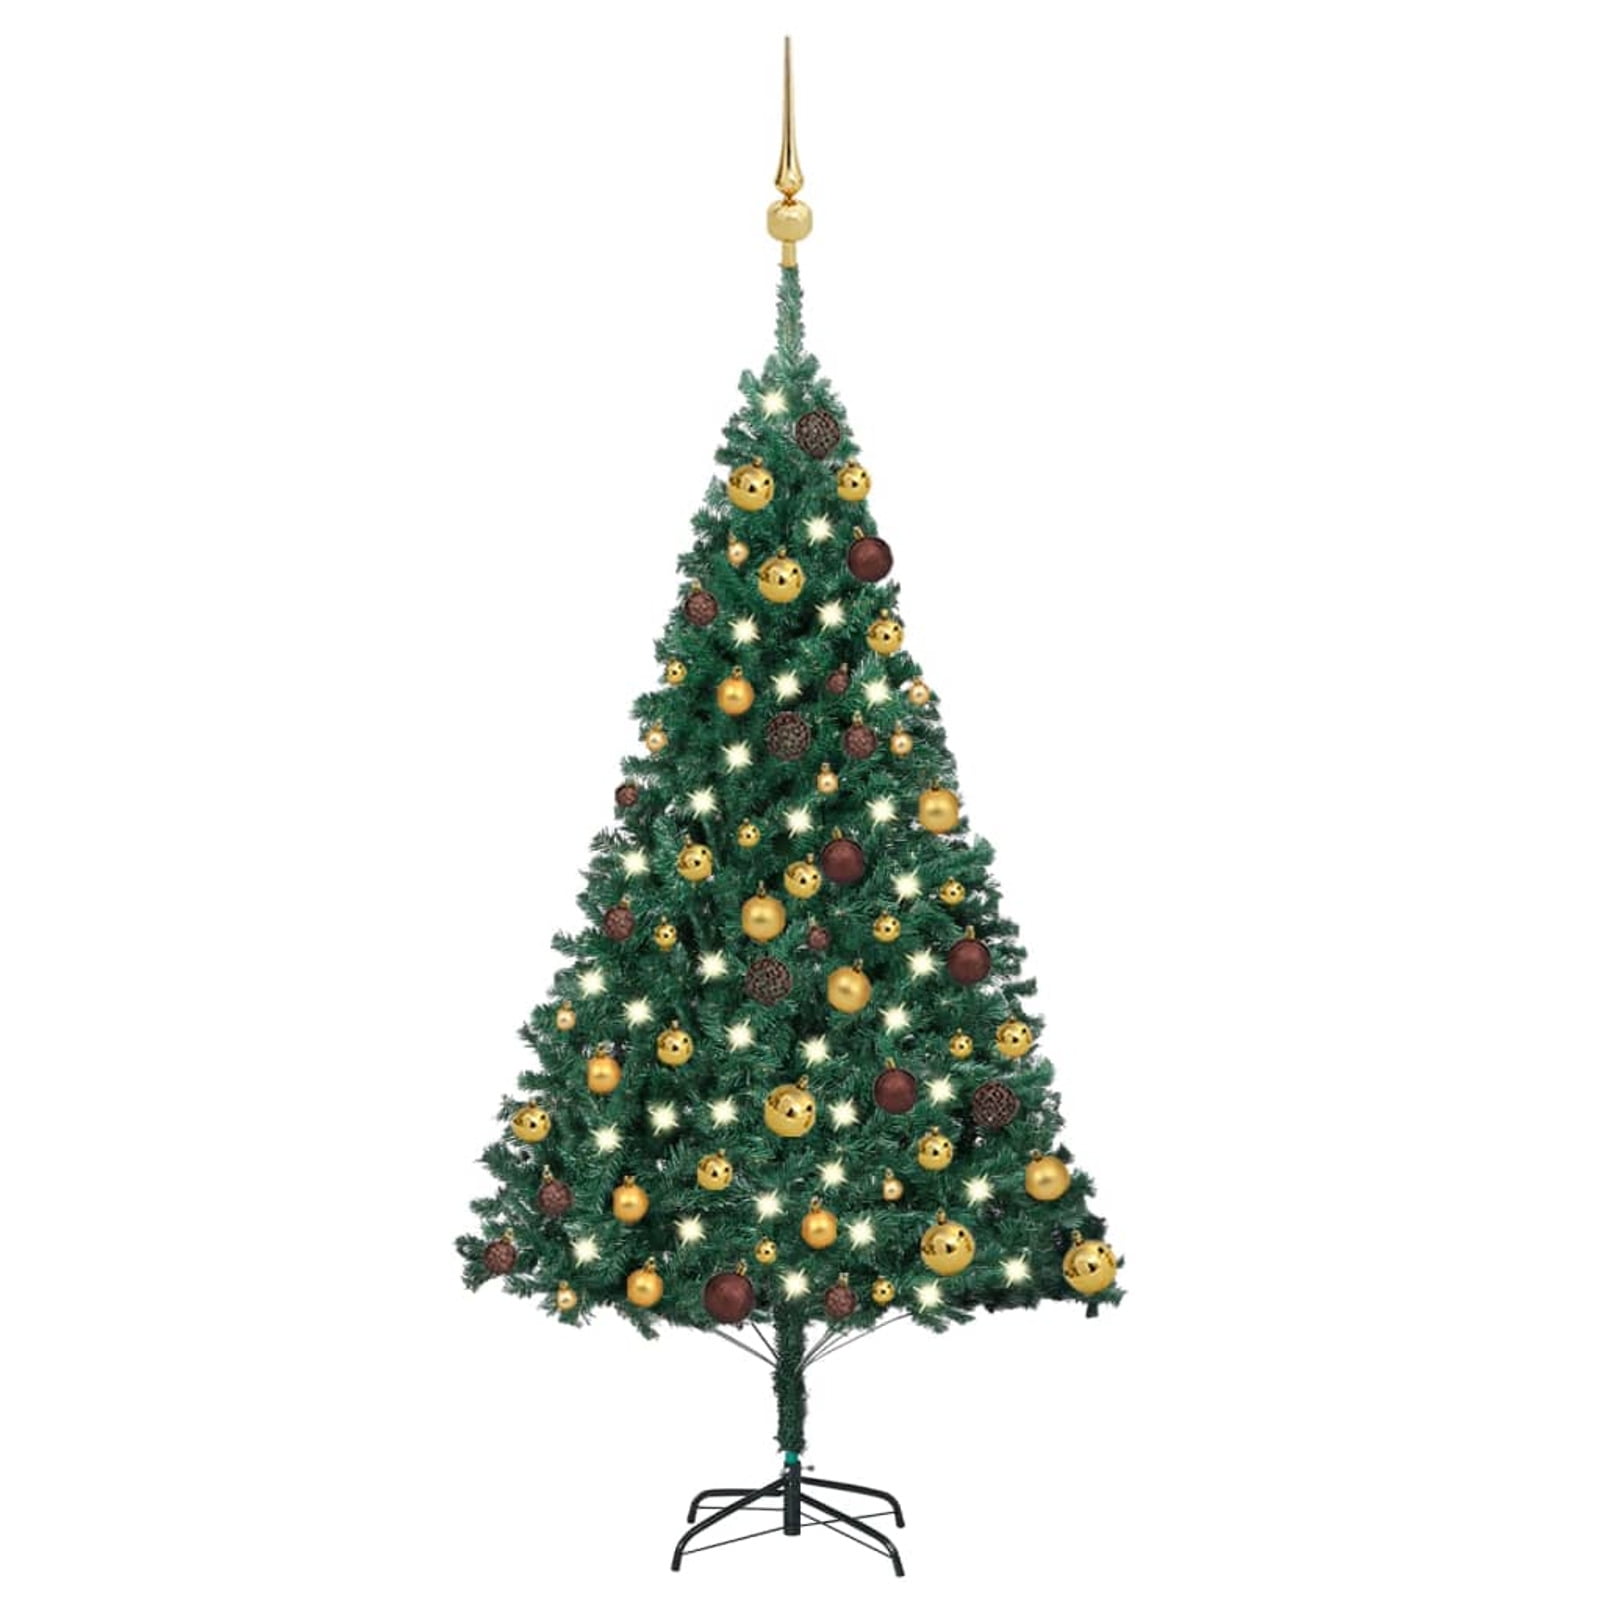 Details about   6/7FT Green Christmas Tree Holiday Festival Home Decoration In/Outdoor w/Stand 